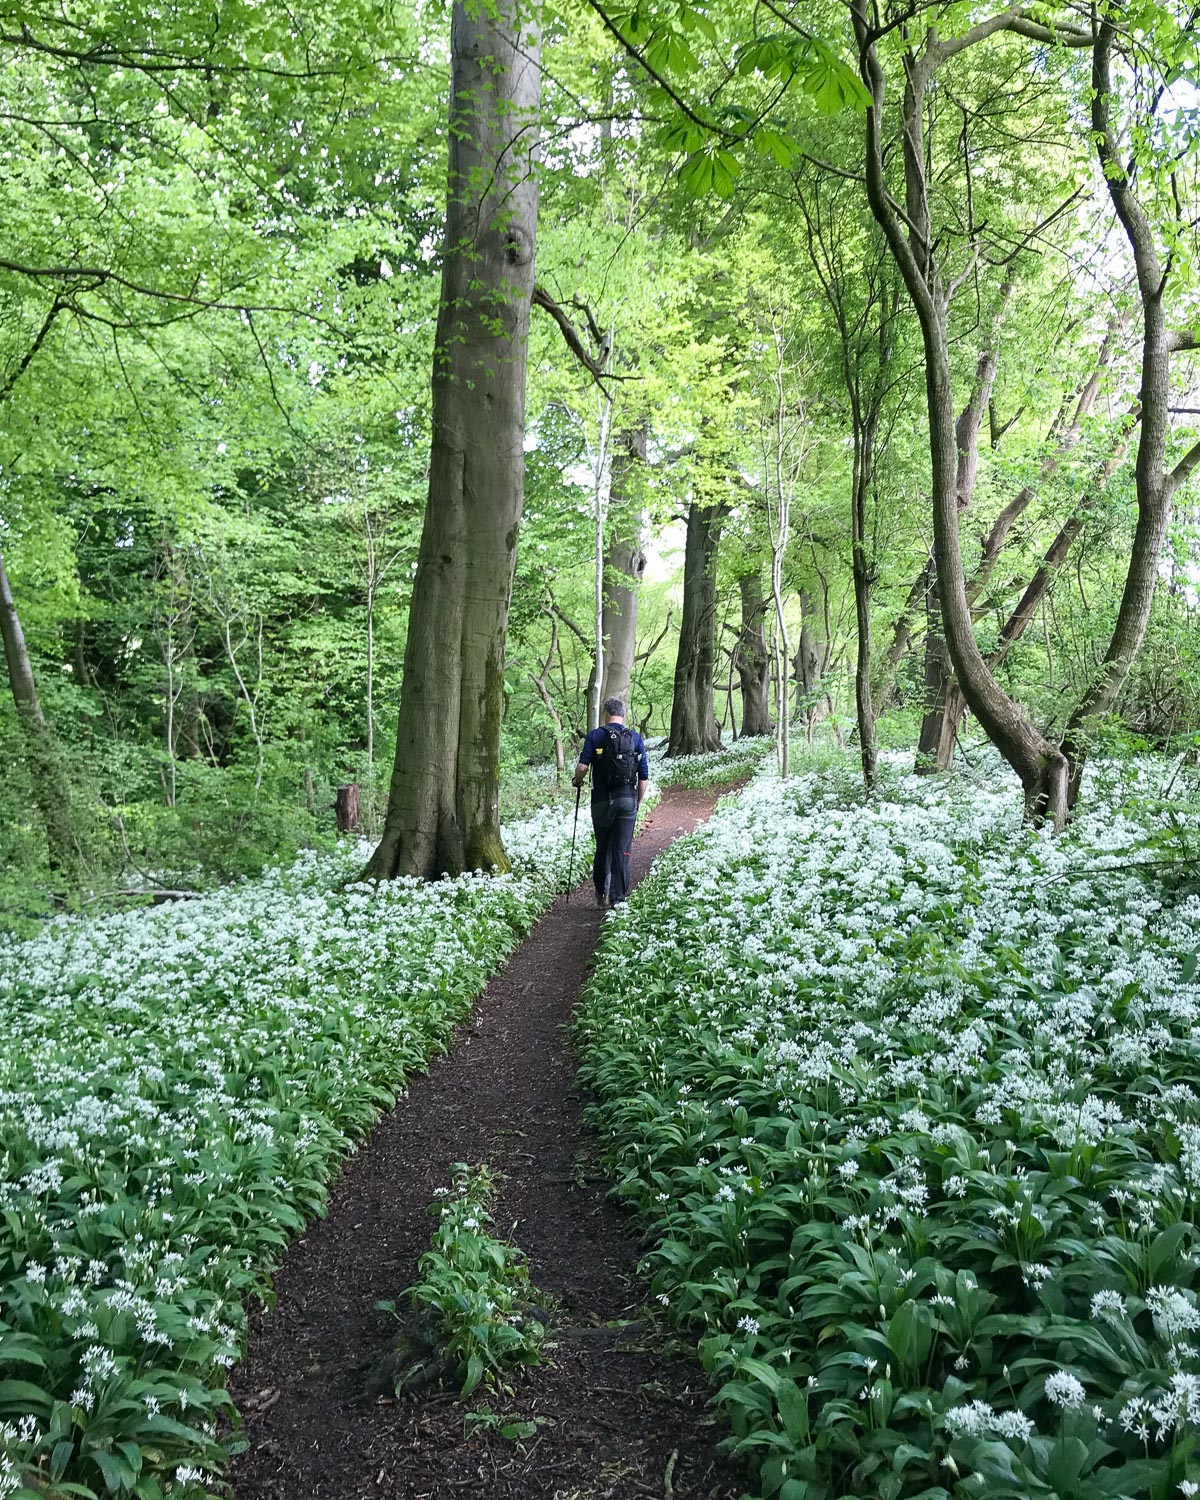 Wild Garlic at in the woods above Horton on the Cotswold Way